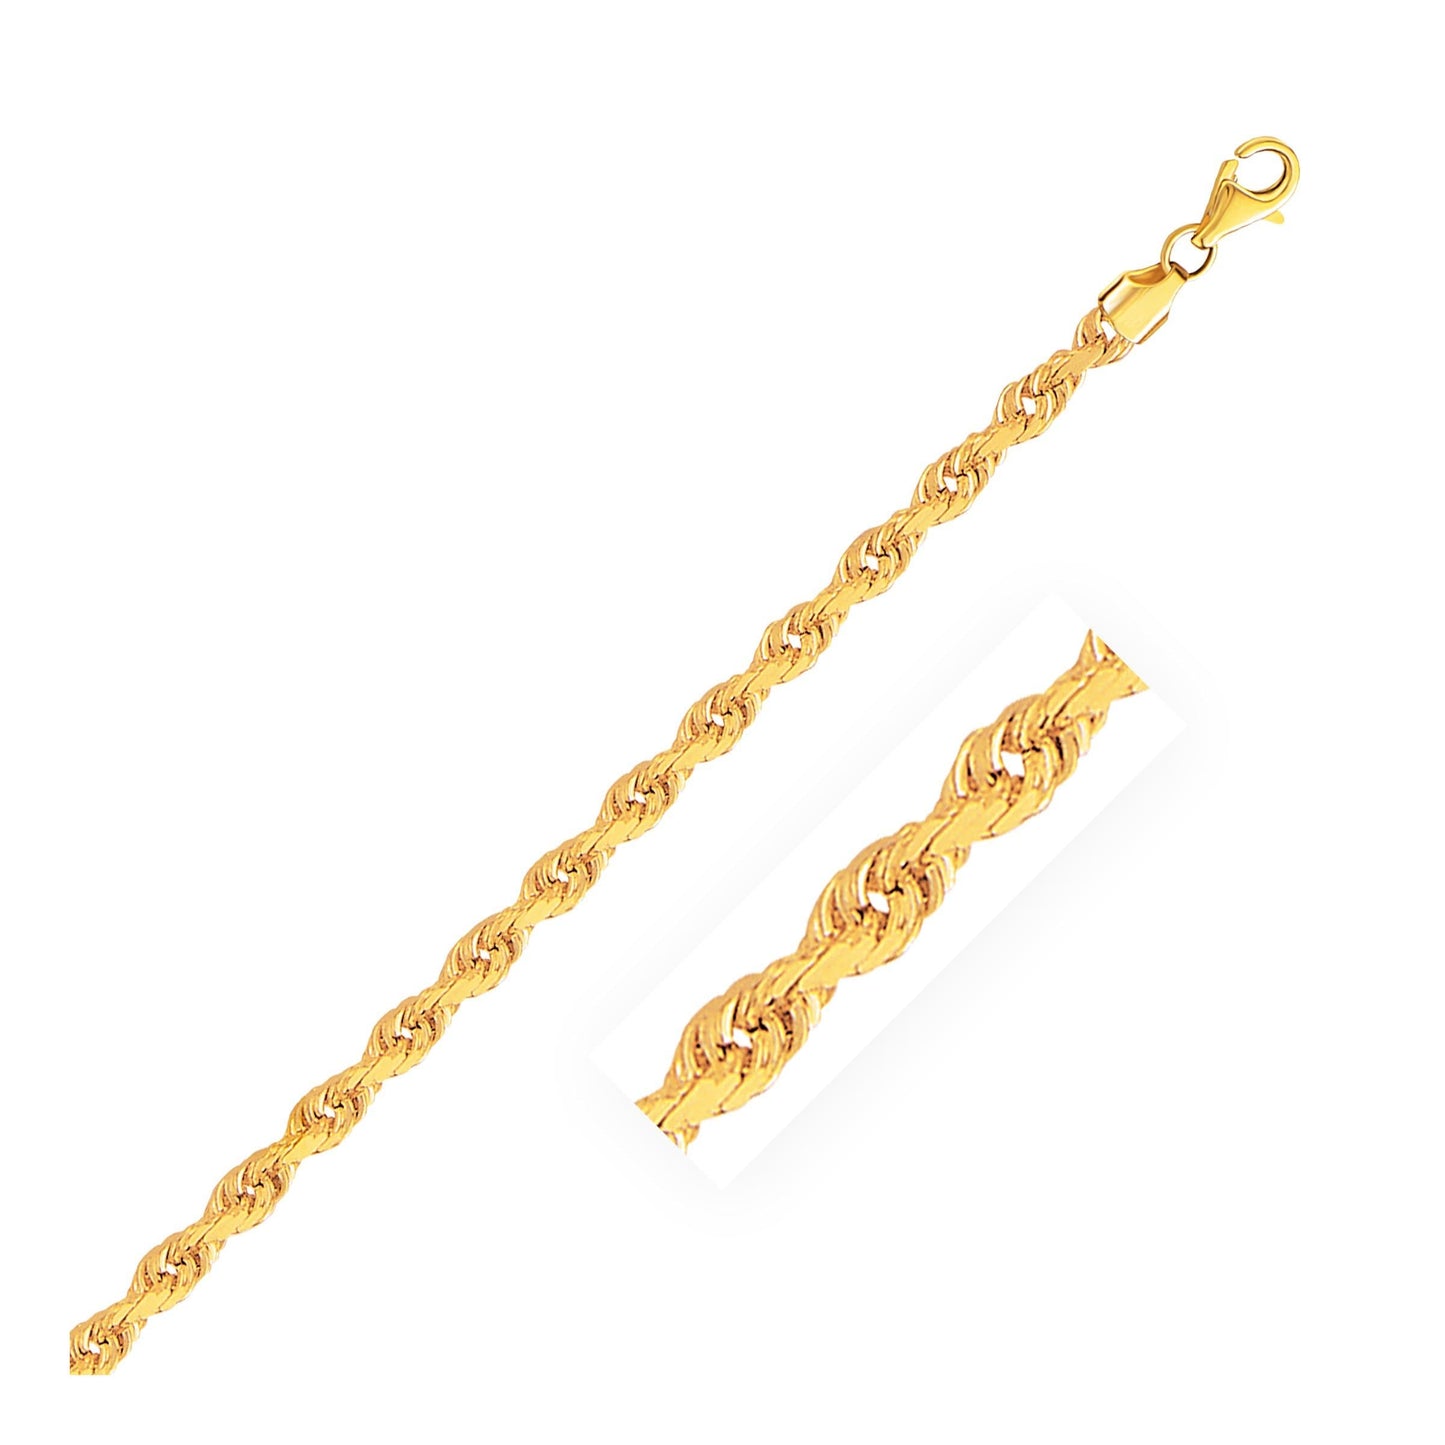 10k Yellow Gold Rope Chain in 3.5 mm